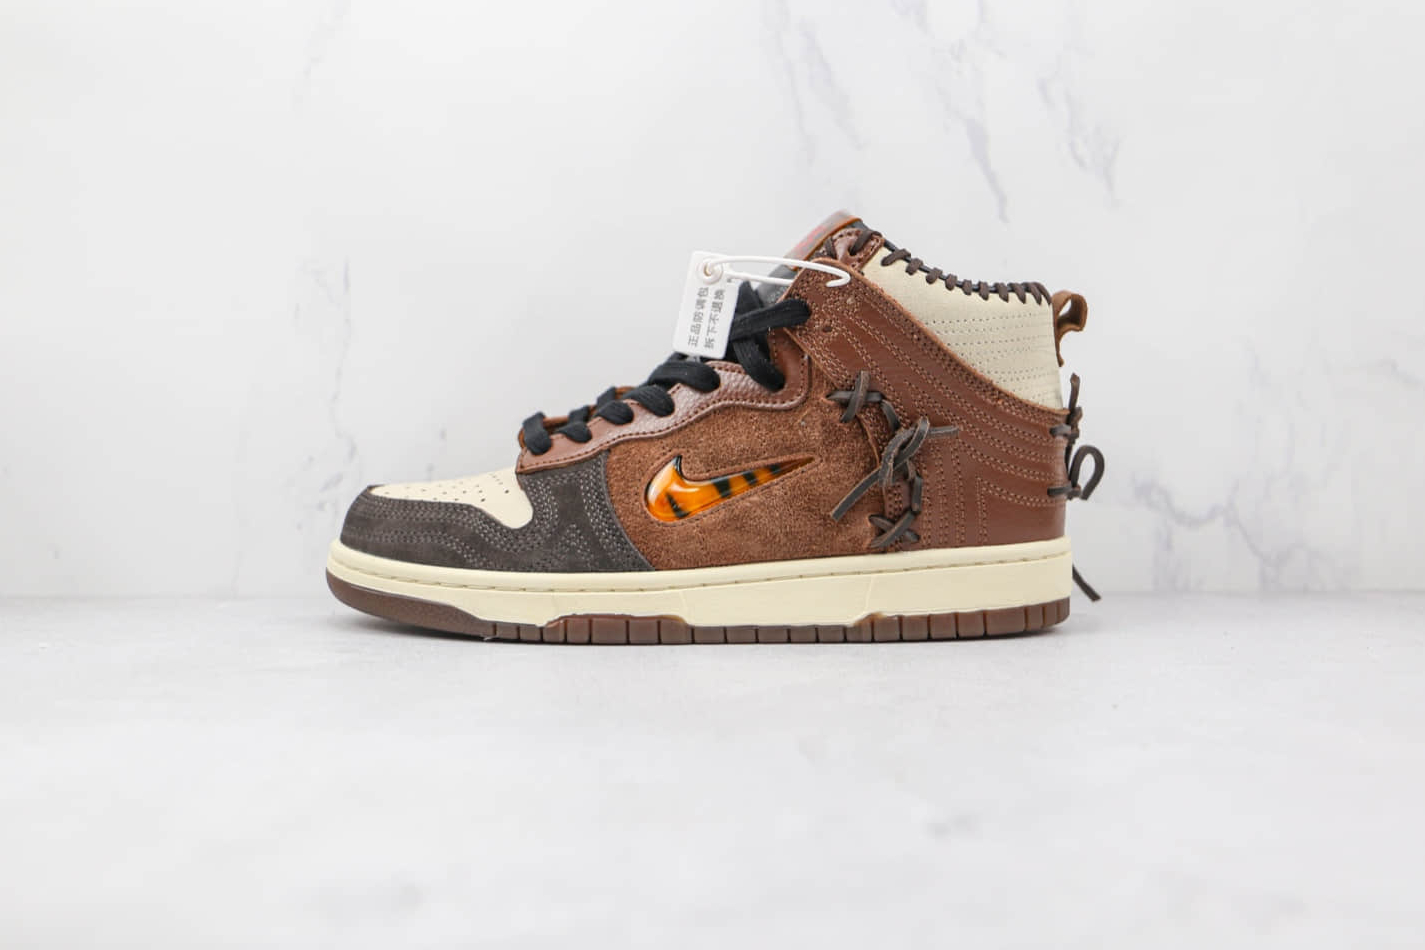 Nike Bodega x Nike Dunk High 'Legend' CZ8125-200 - Exclusive Collaboration with Bold Aesthetic